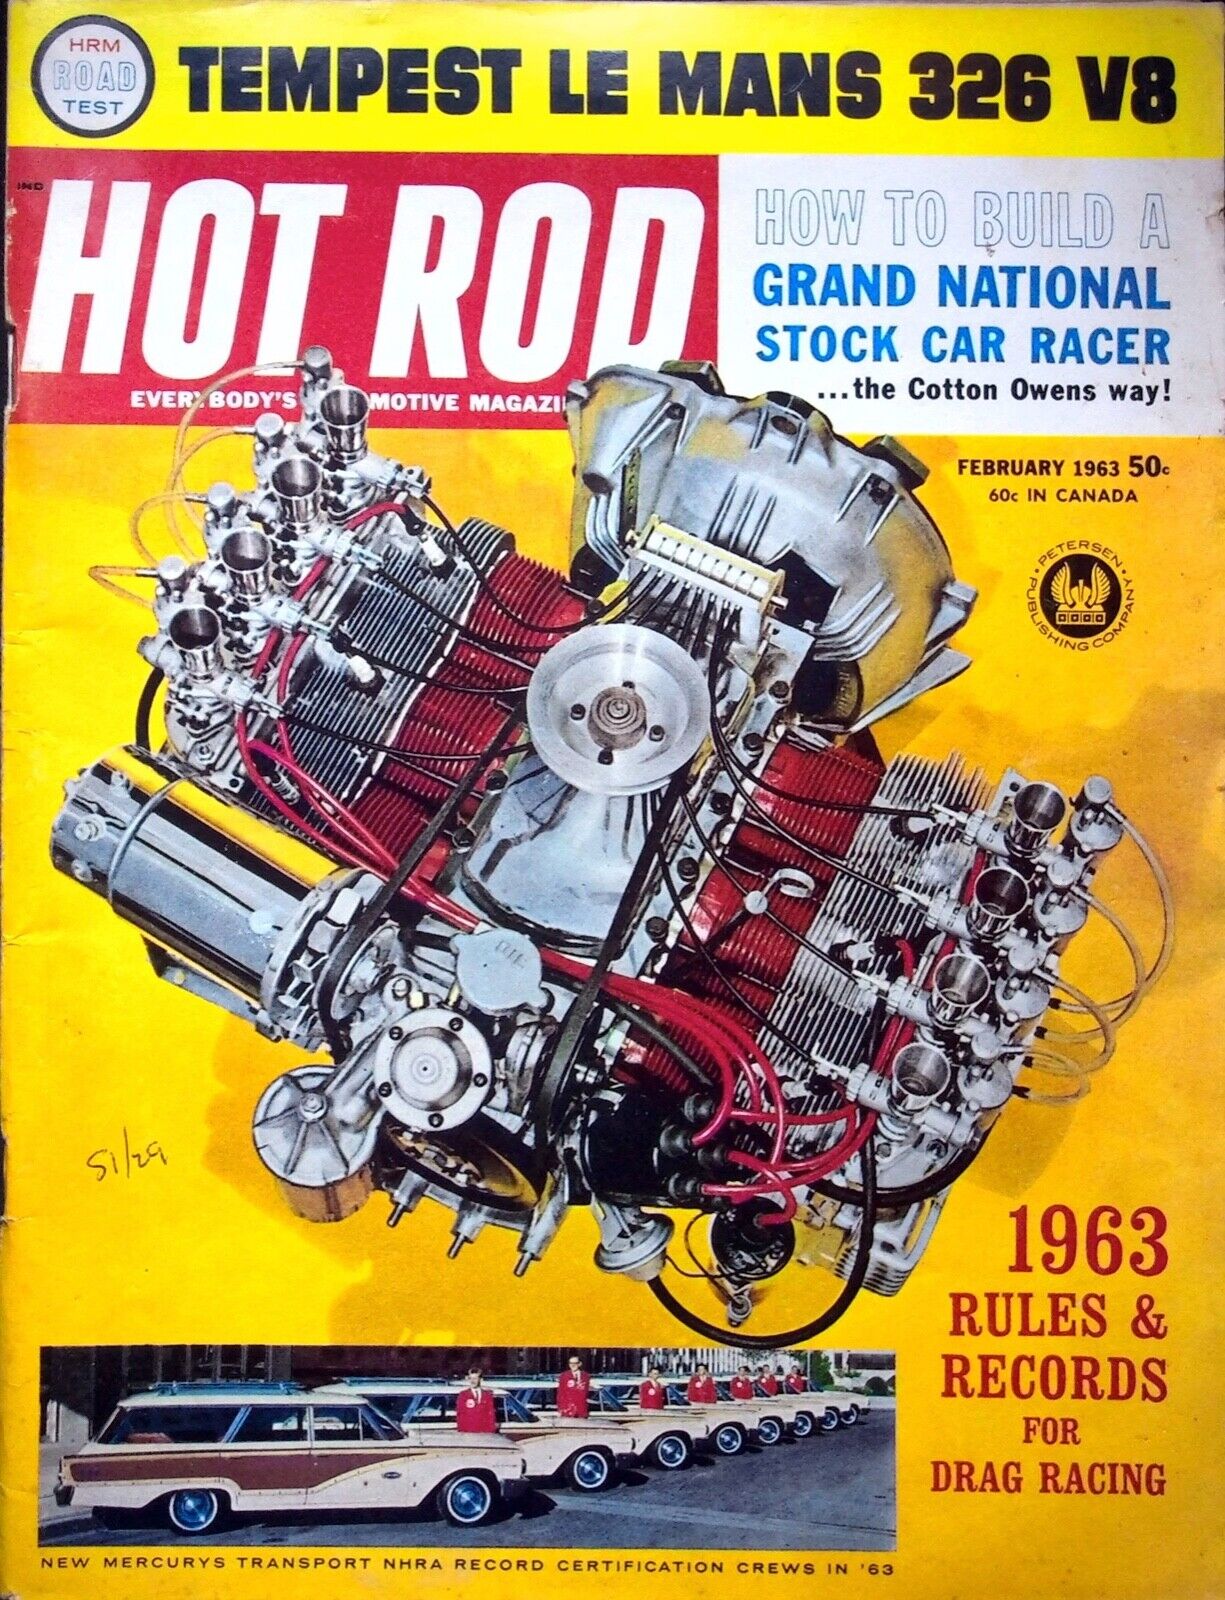 RULES & RECORDS FOR DRAG RACING - HOT ROD MAGAZINE, FEBRUARY 1963